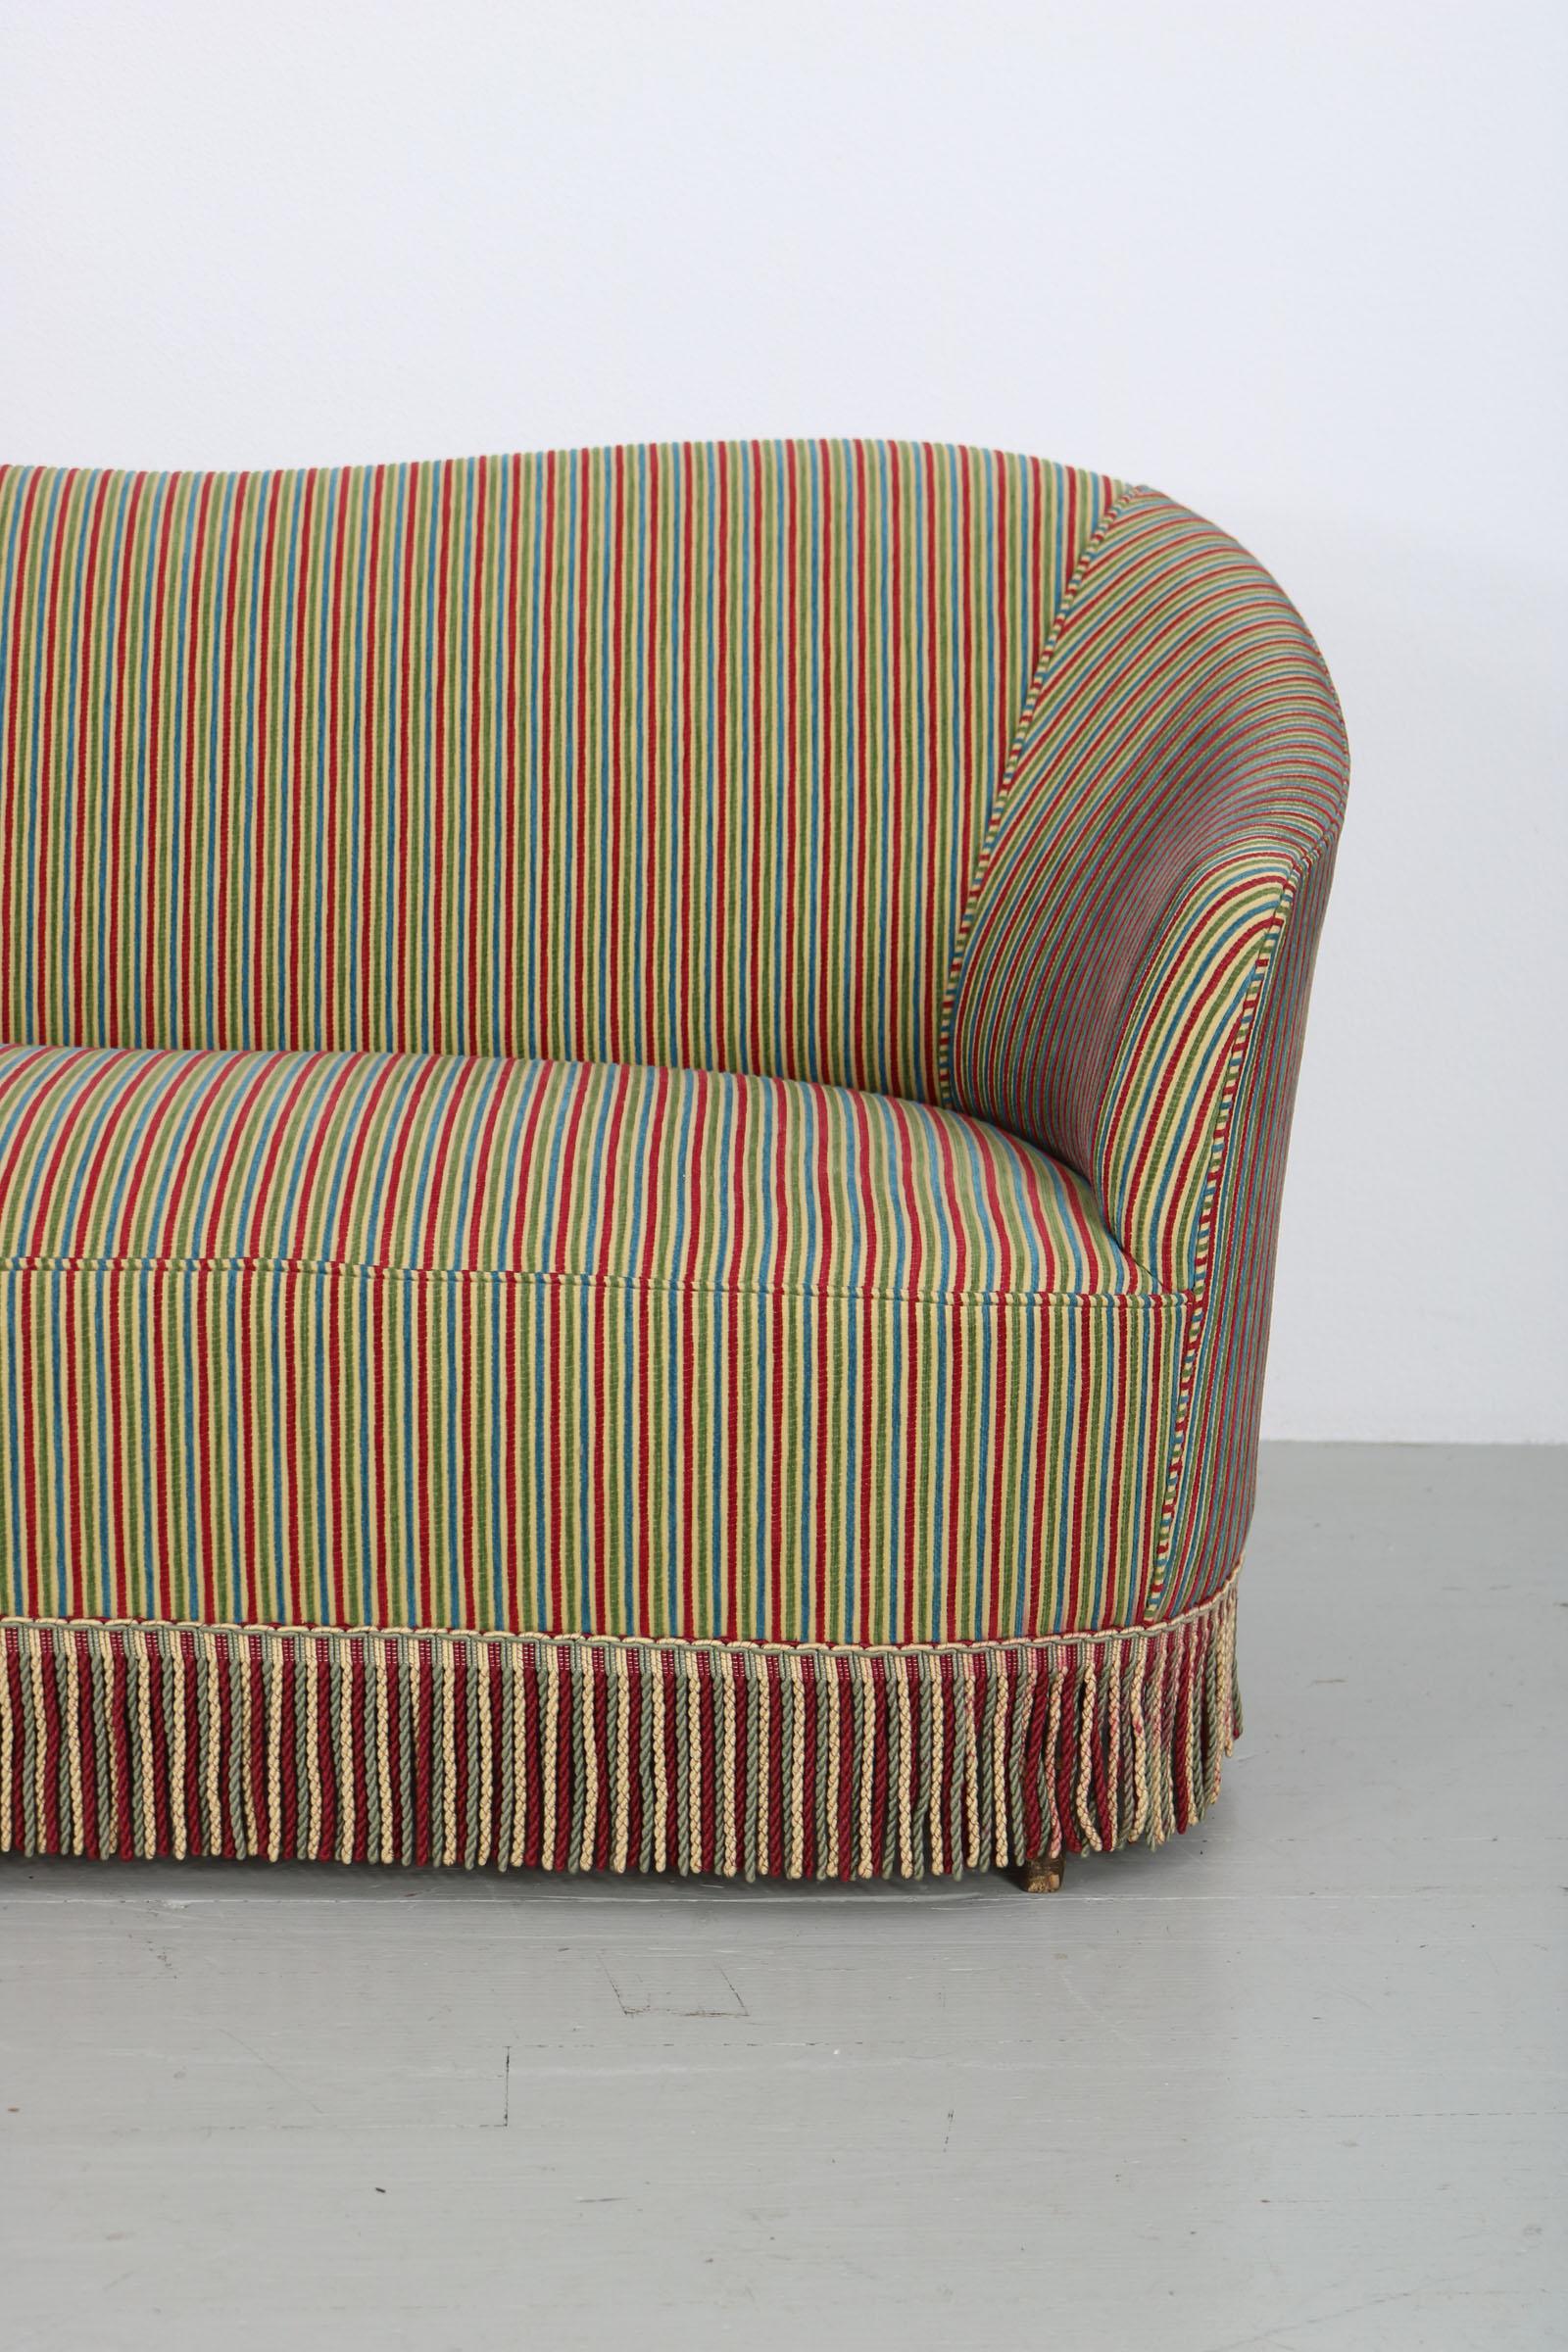 Set of 2 Sofas with Fabric by Fede Cheti, Italy 1940s For Sale 10